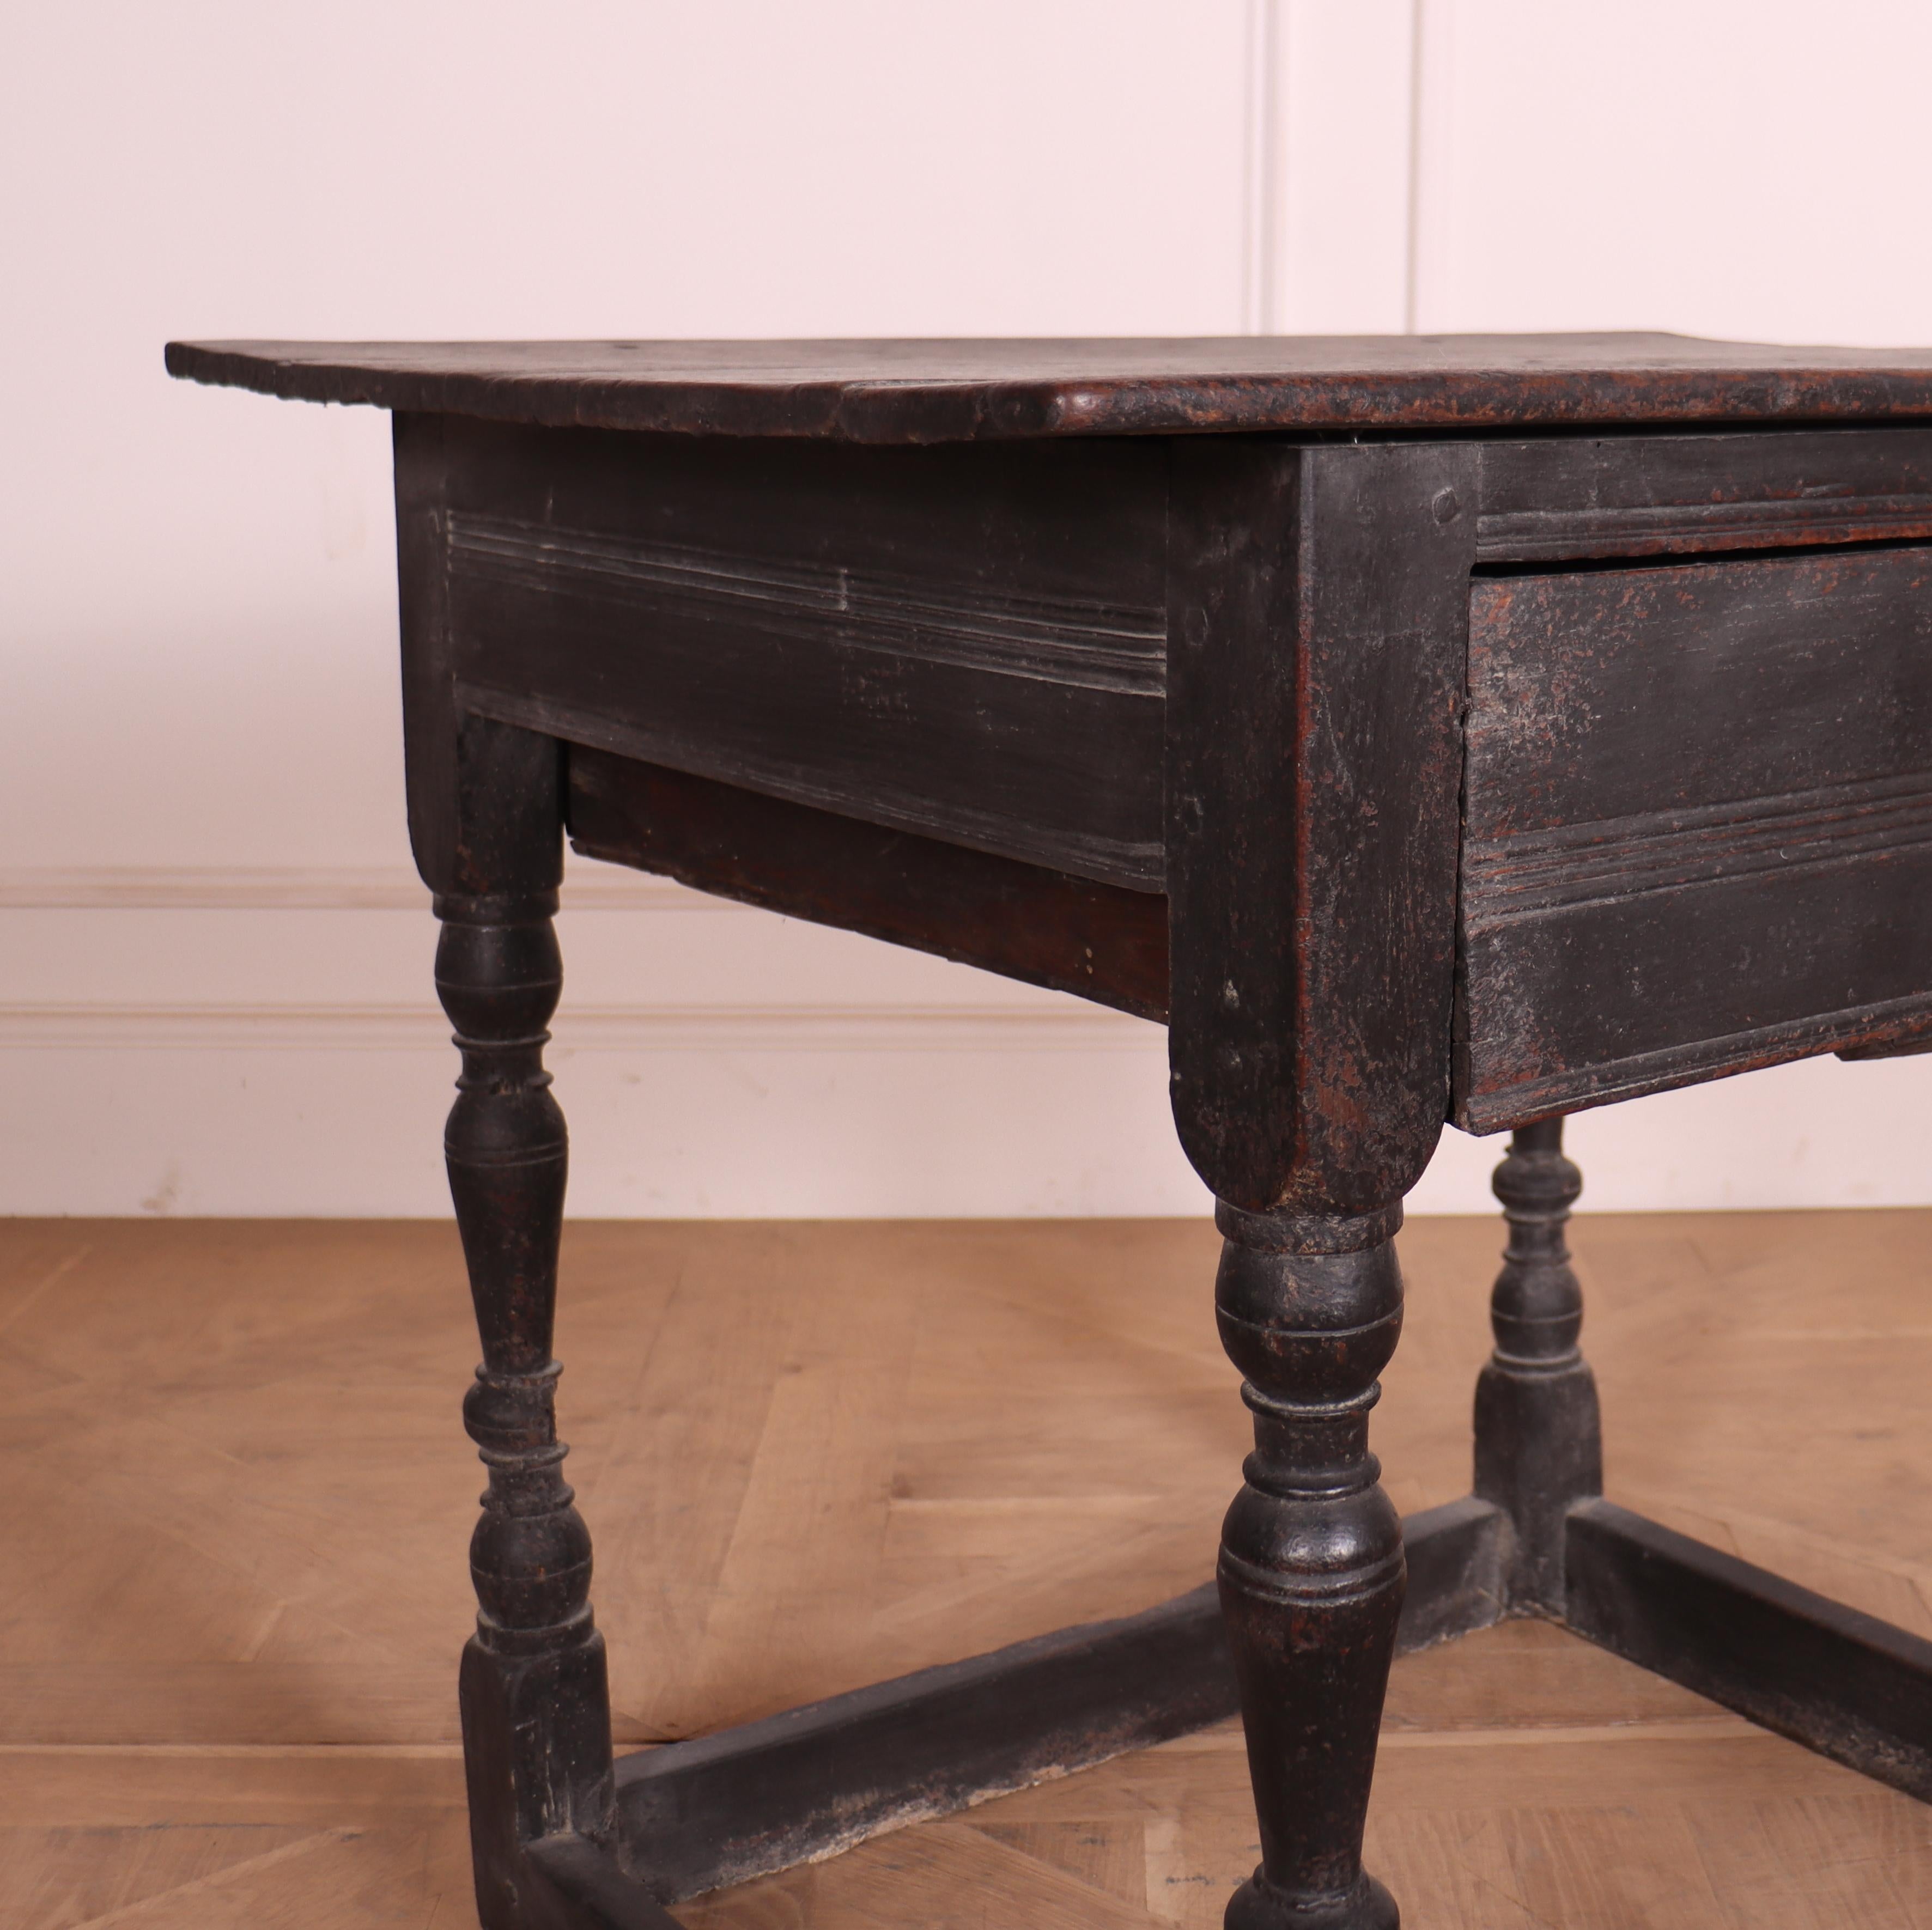 18th century English painted oak one drawer lamp table. 1780.



Dimensions
32 inches (81 cms) Wide
26 inches (66 cms) Deep
28 inches (71 cms) High.